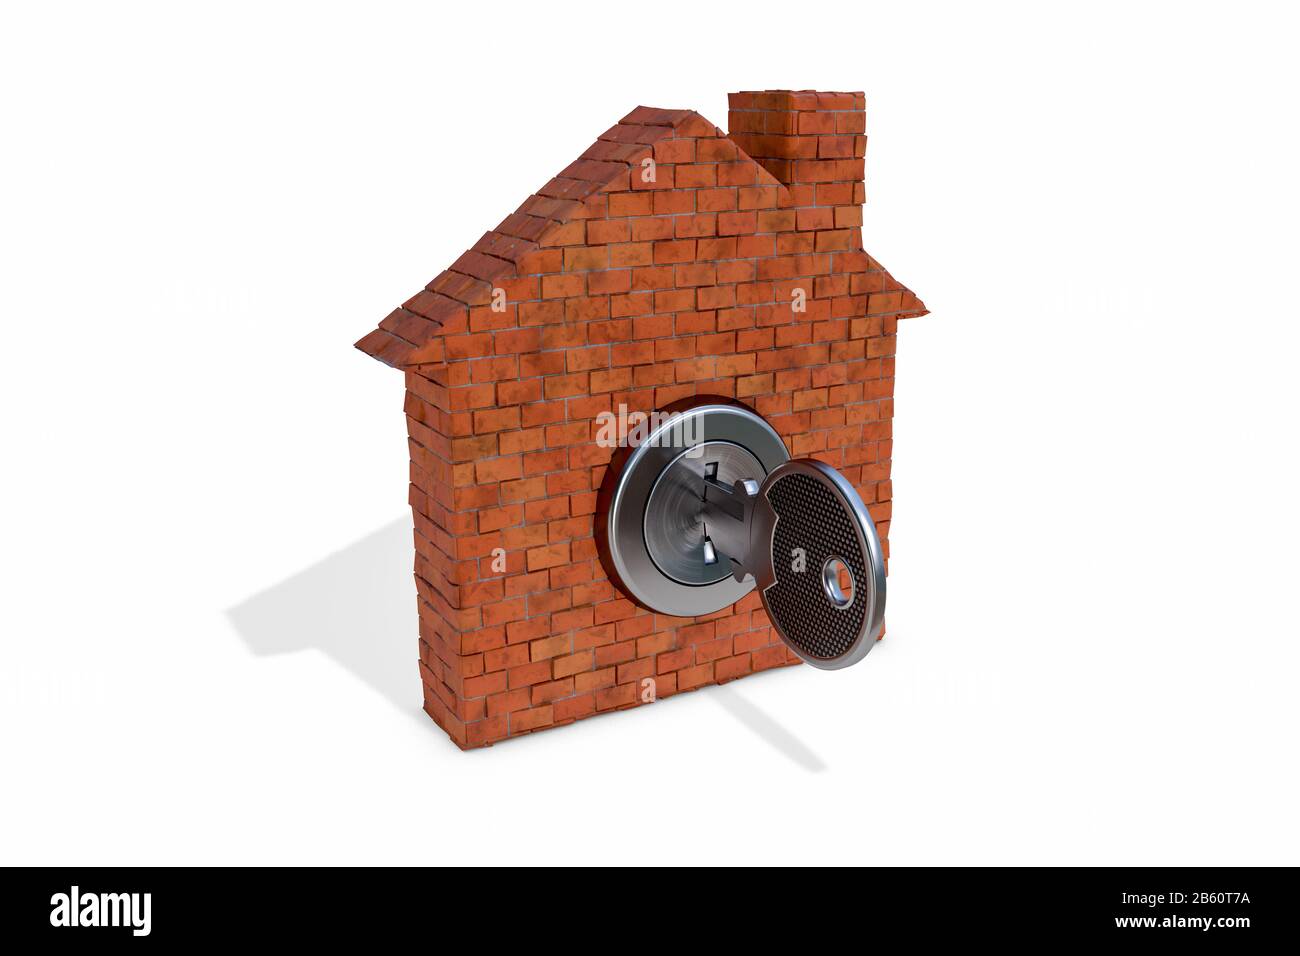 3D illustration: Symbol of a brick house with a keyhole with a key inside on white background isolated. The concept of buying or renting a new home. Stock Photo